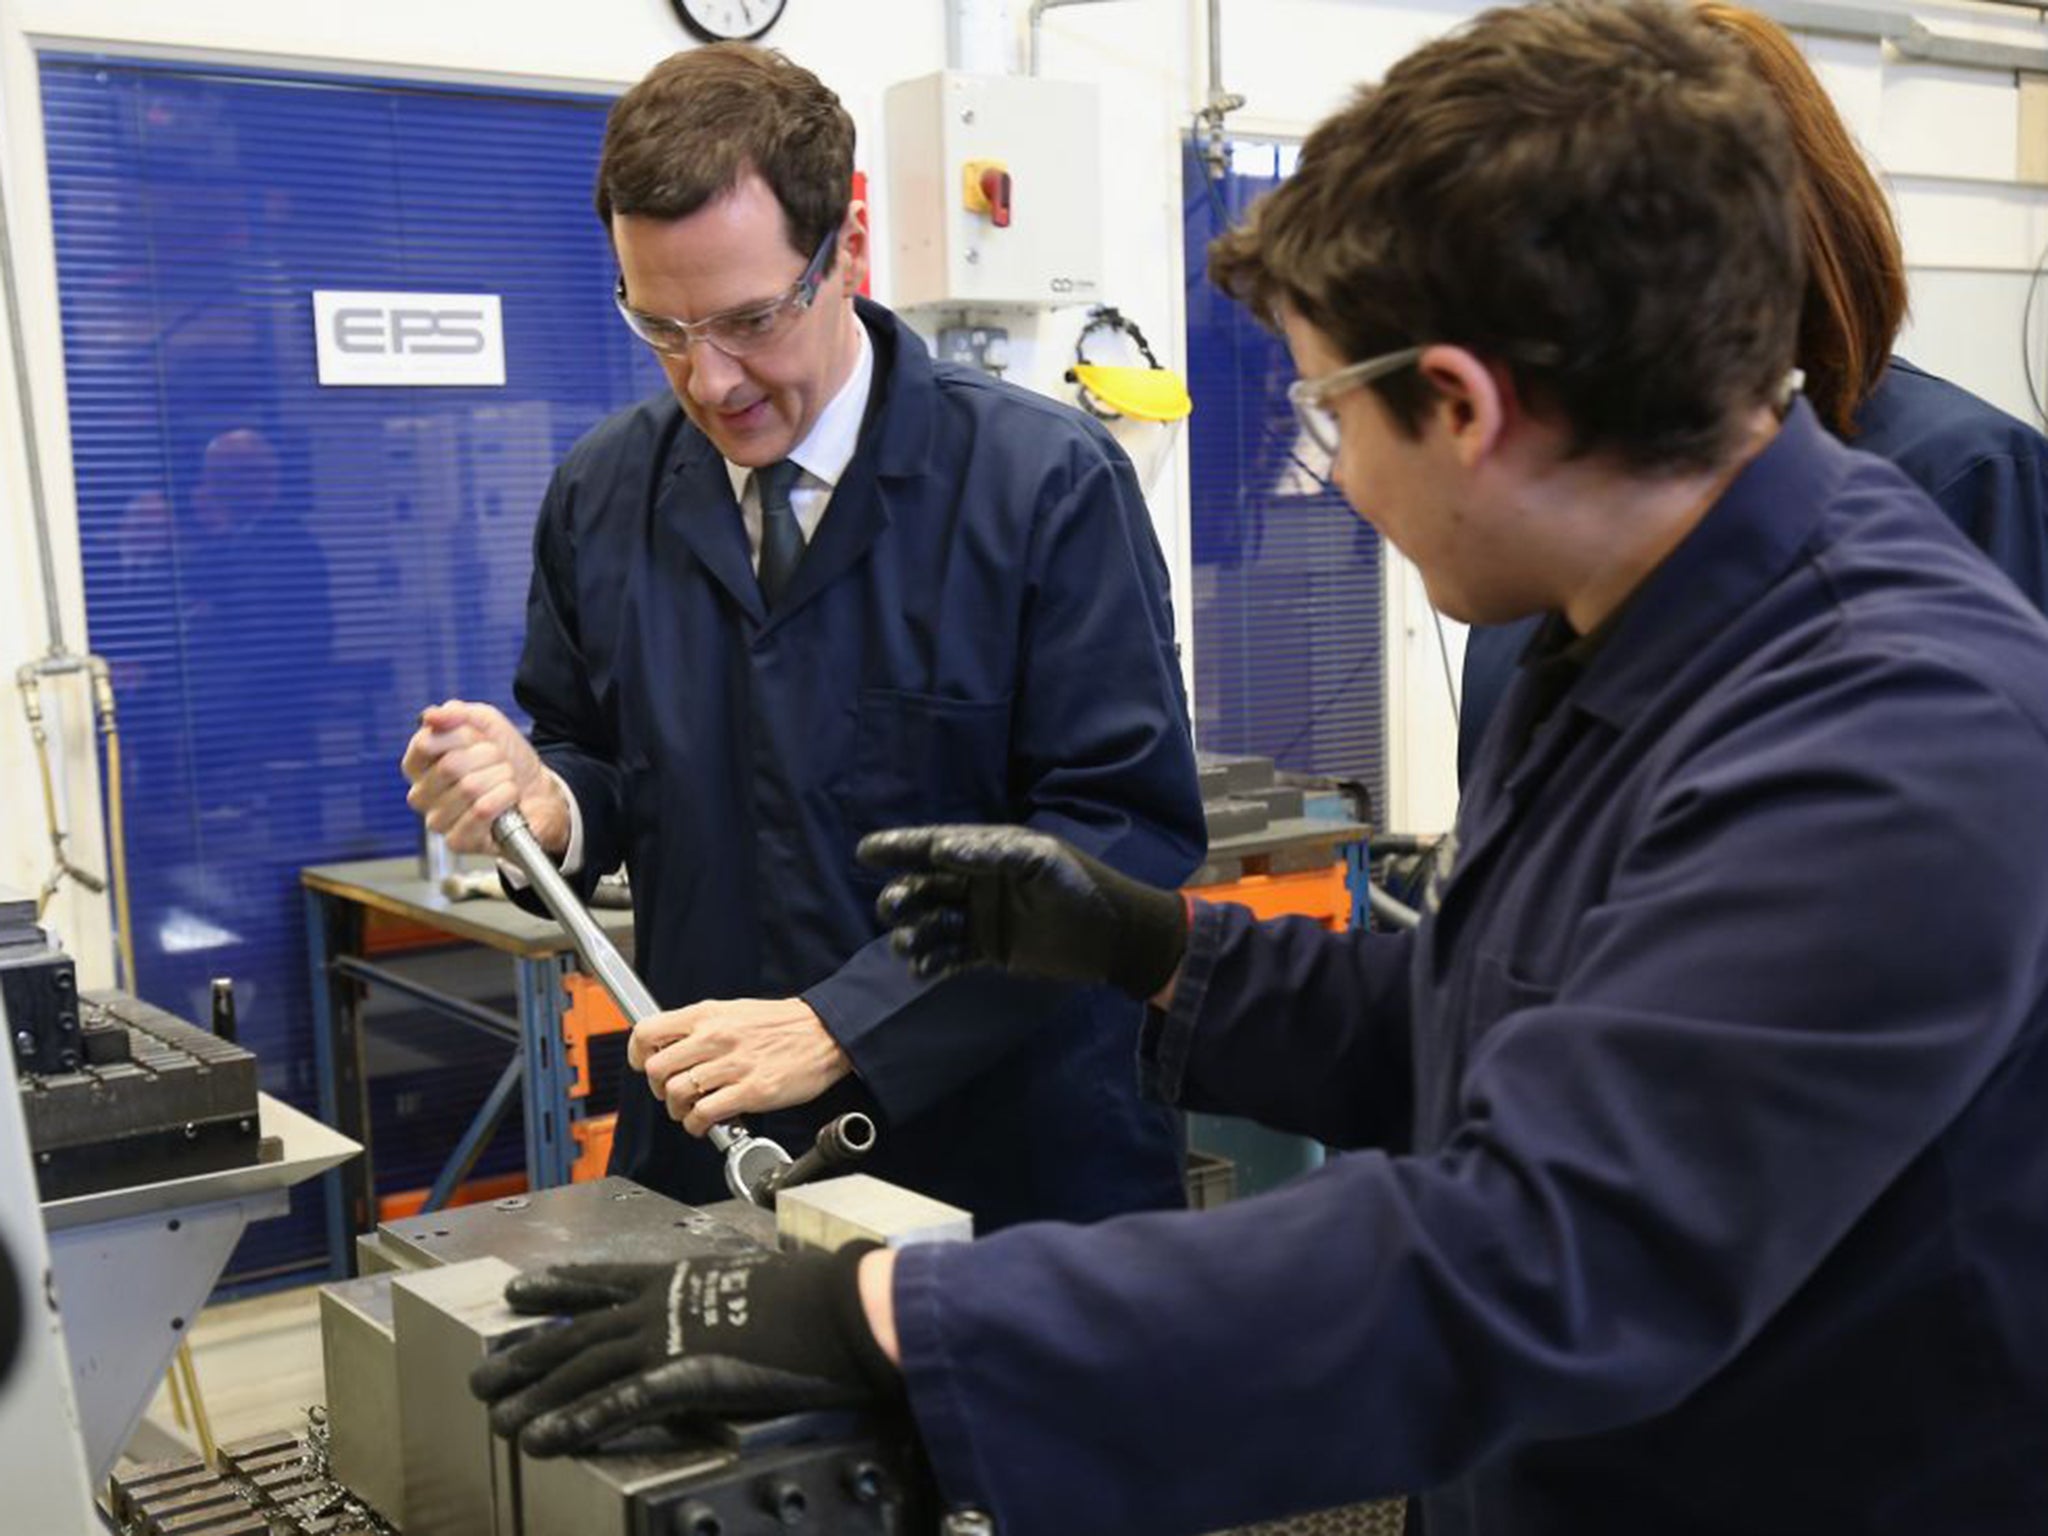 The Chancellor meets apprentices in Loughborough in April. The new £7.20 minimum may not apply to them